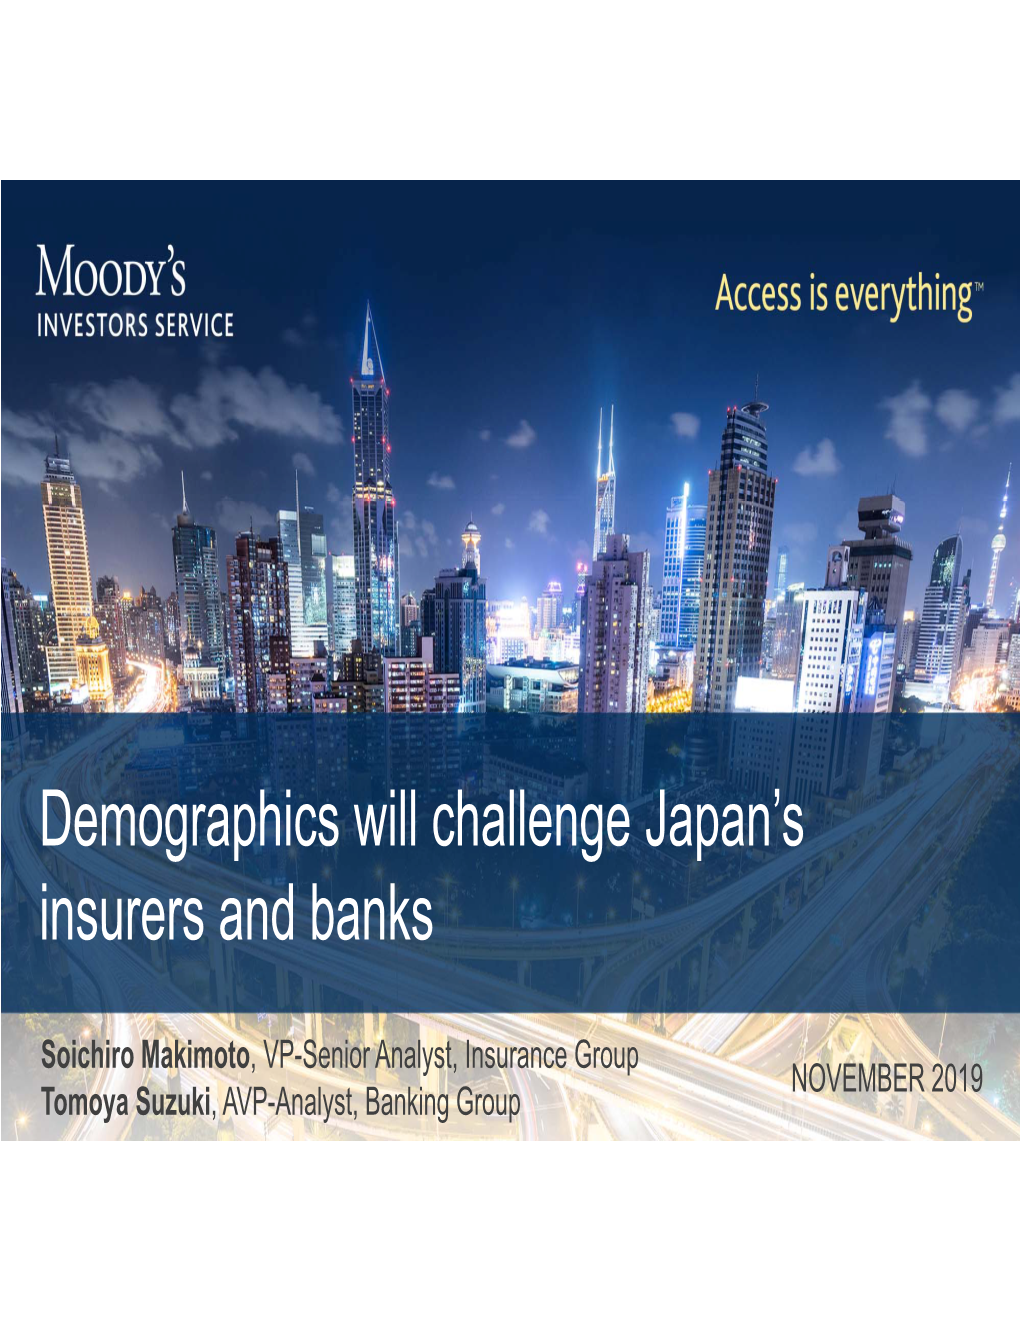 Demographics Will Challenge Japan's Insurers and Banks, November 2019 3 Agenda 1.Japan’S Aging Population 2.The Impact on Insurers and Banks